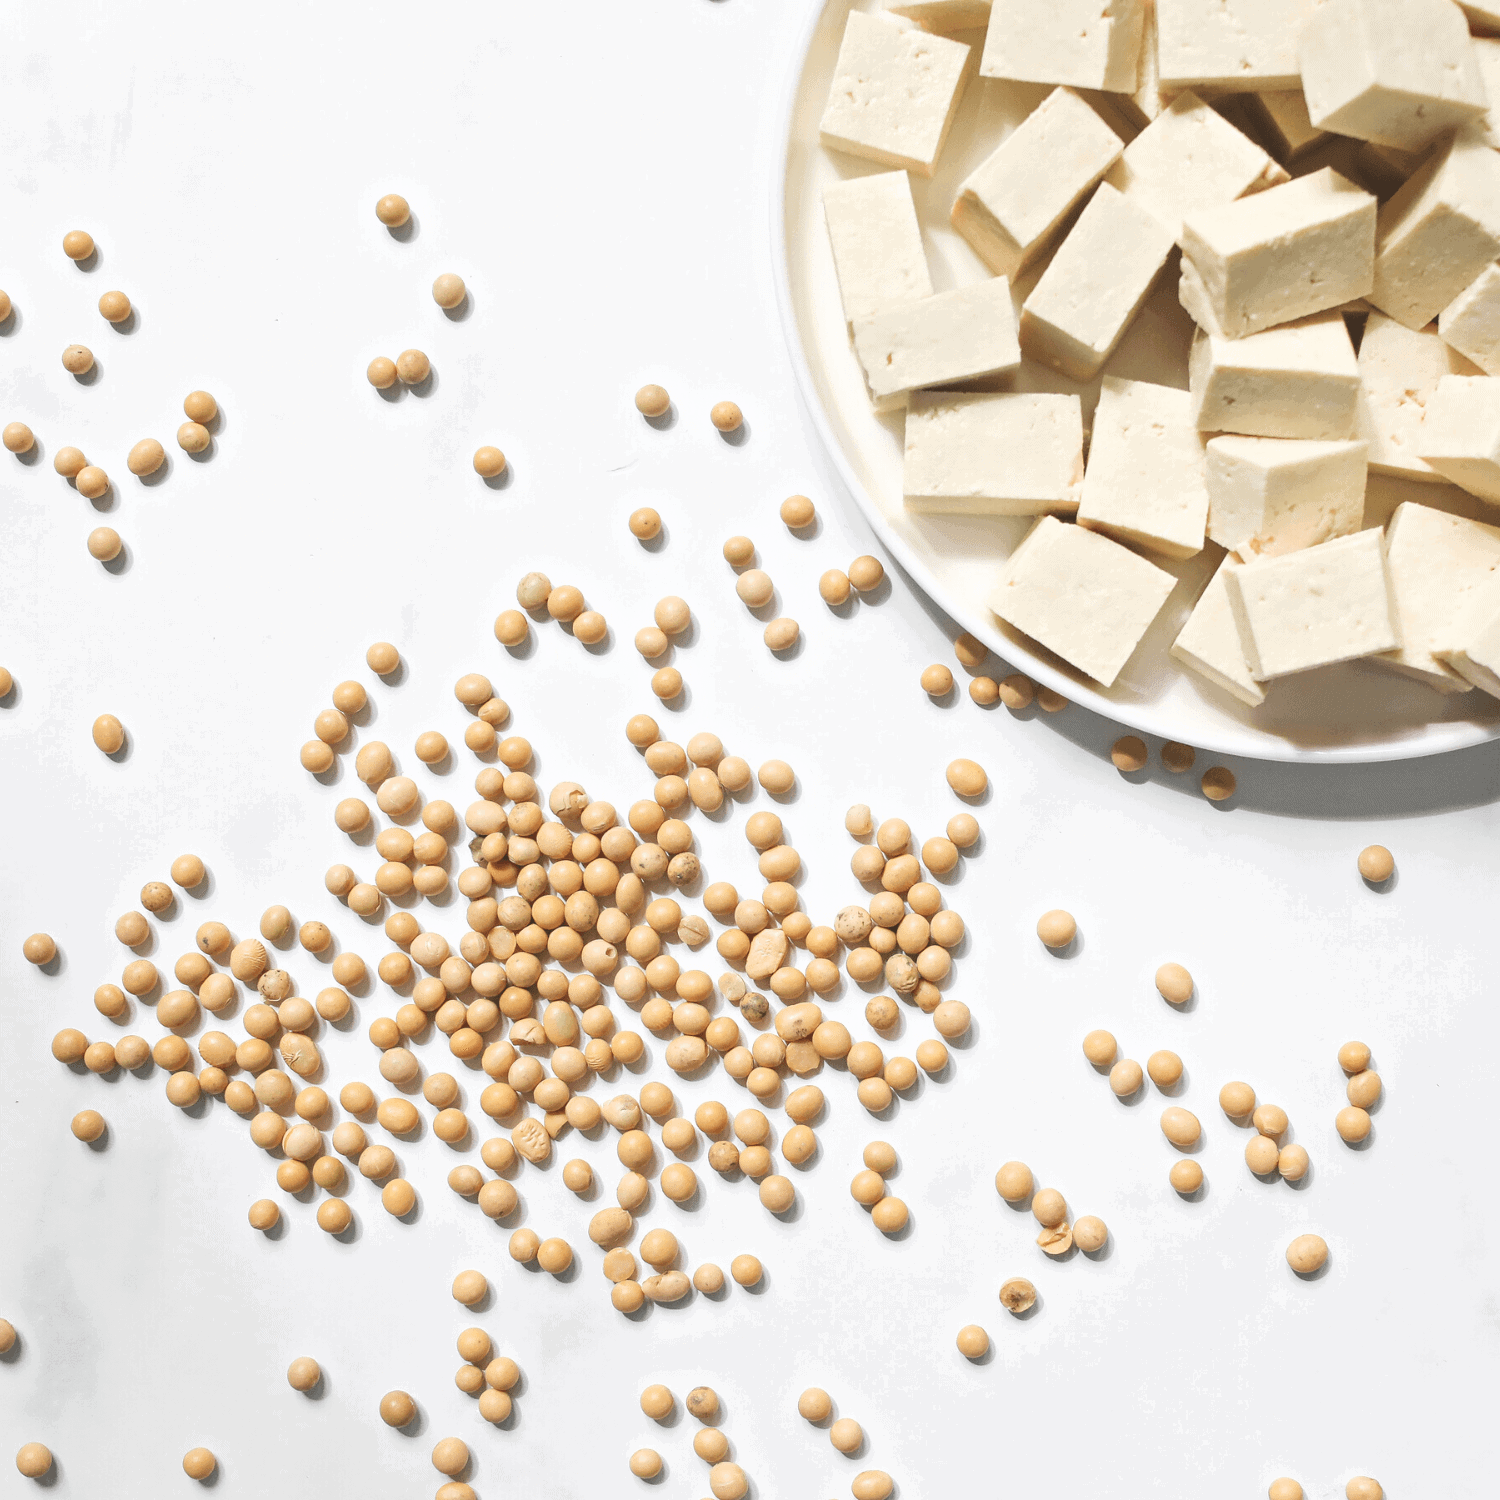 soybeans scattered around a plate of cubed tofu